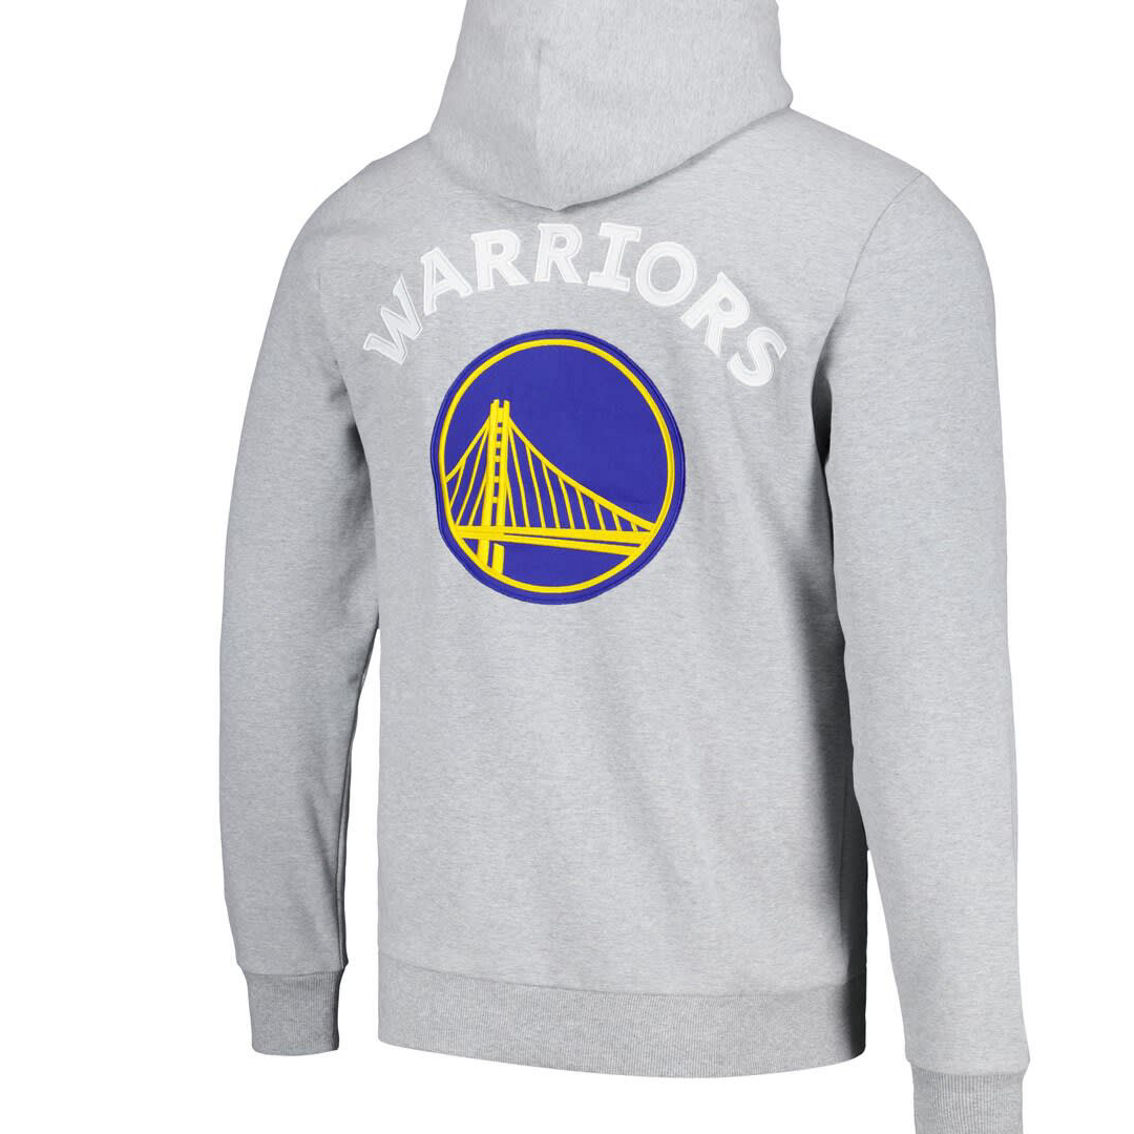 FISLL Unisex Heather Gray Golden State Warriors Heritage Crest Pullover Hoodie - Image 4 of 4